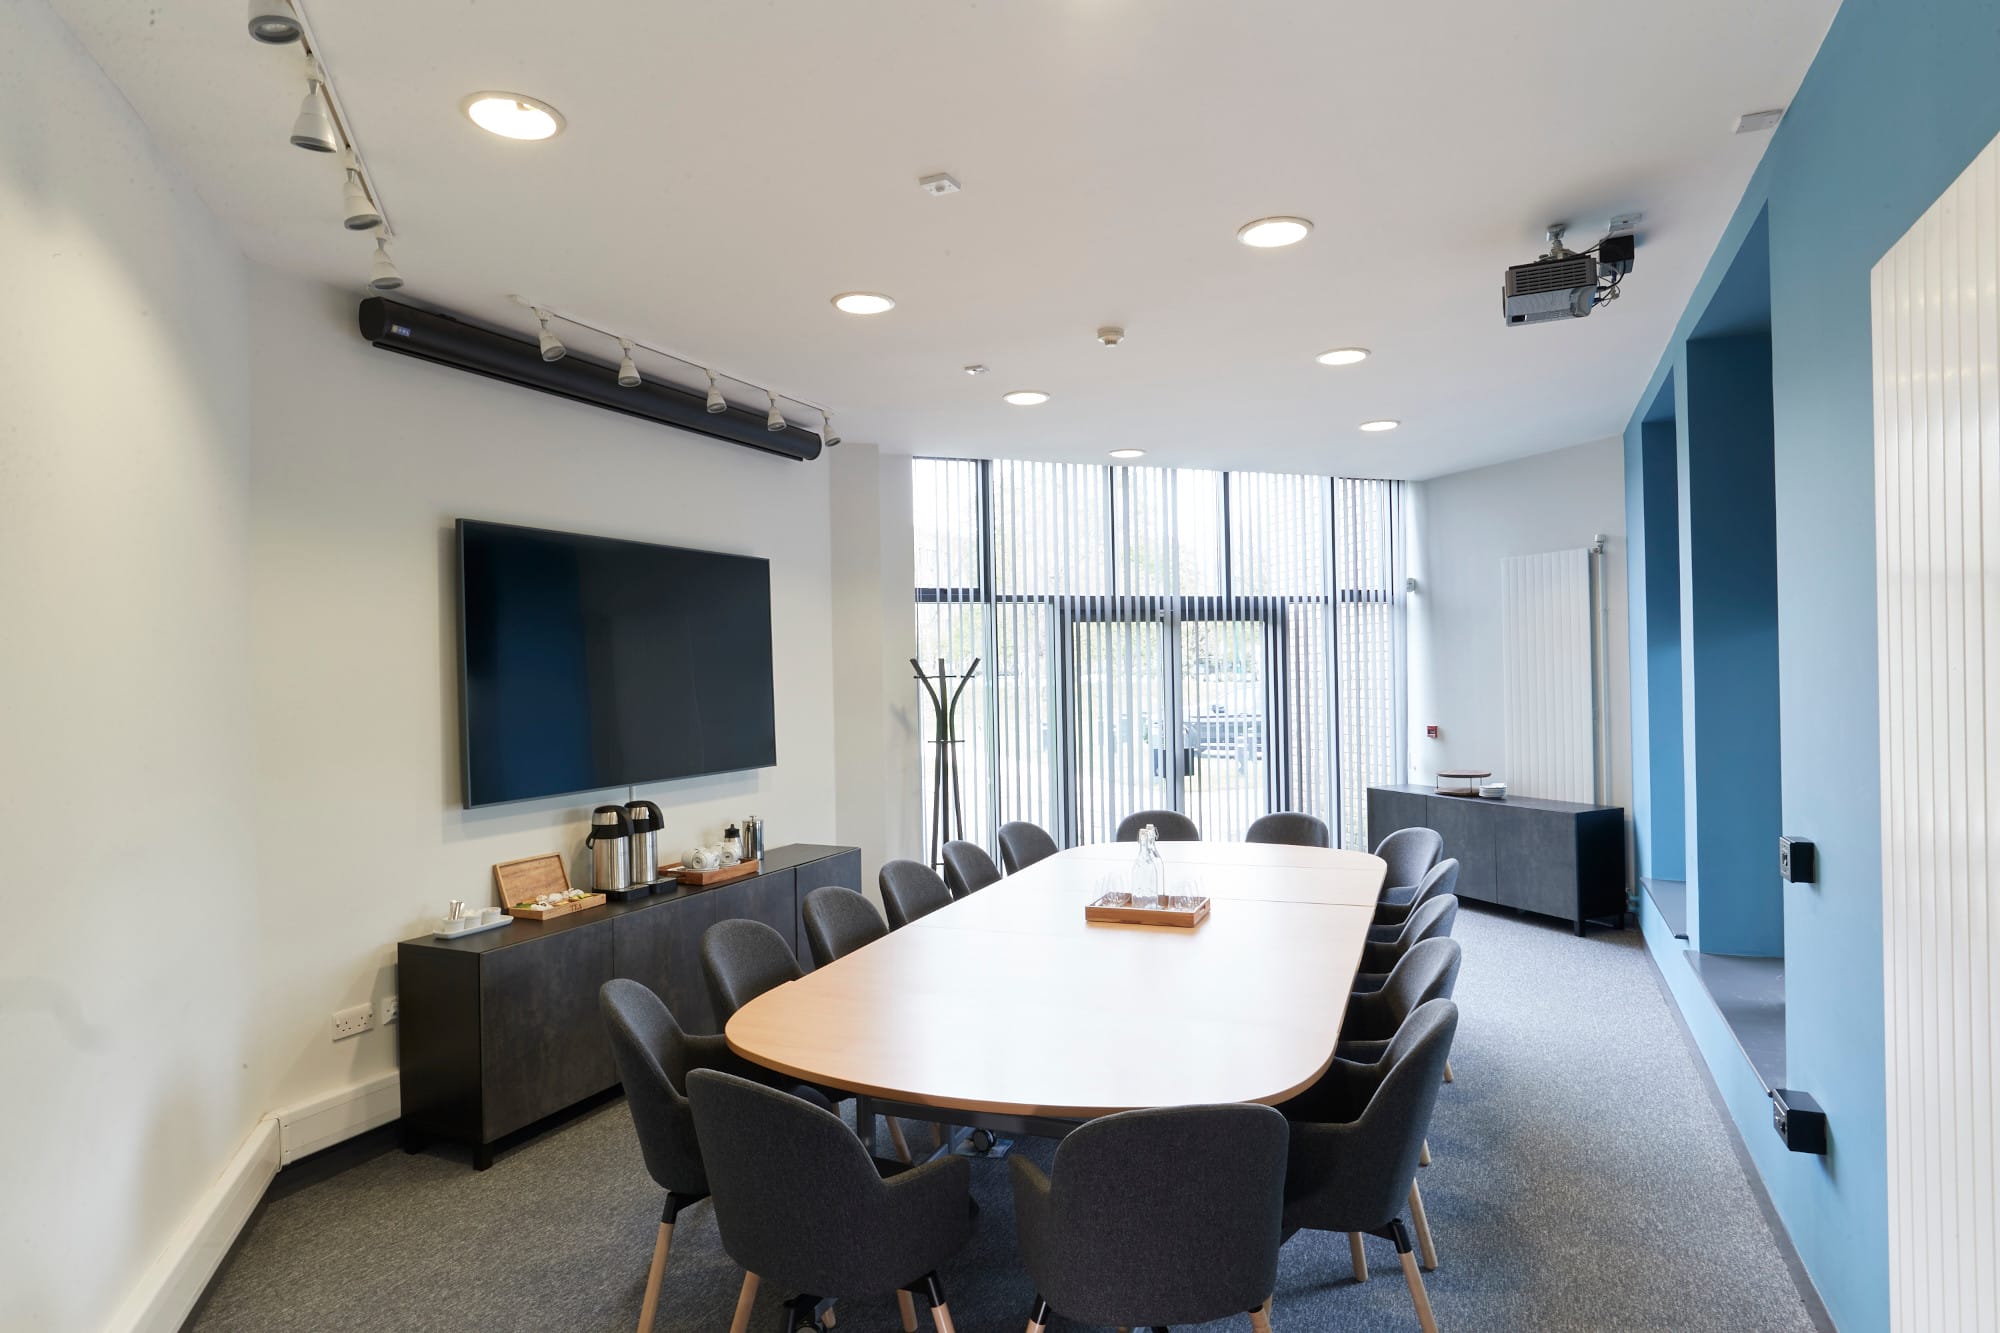 Brightly lit meeting room with a board table and chairs.